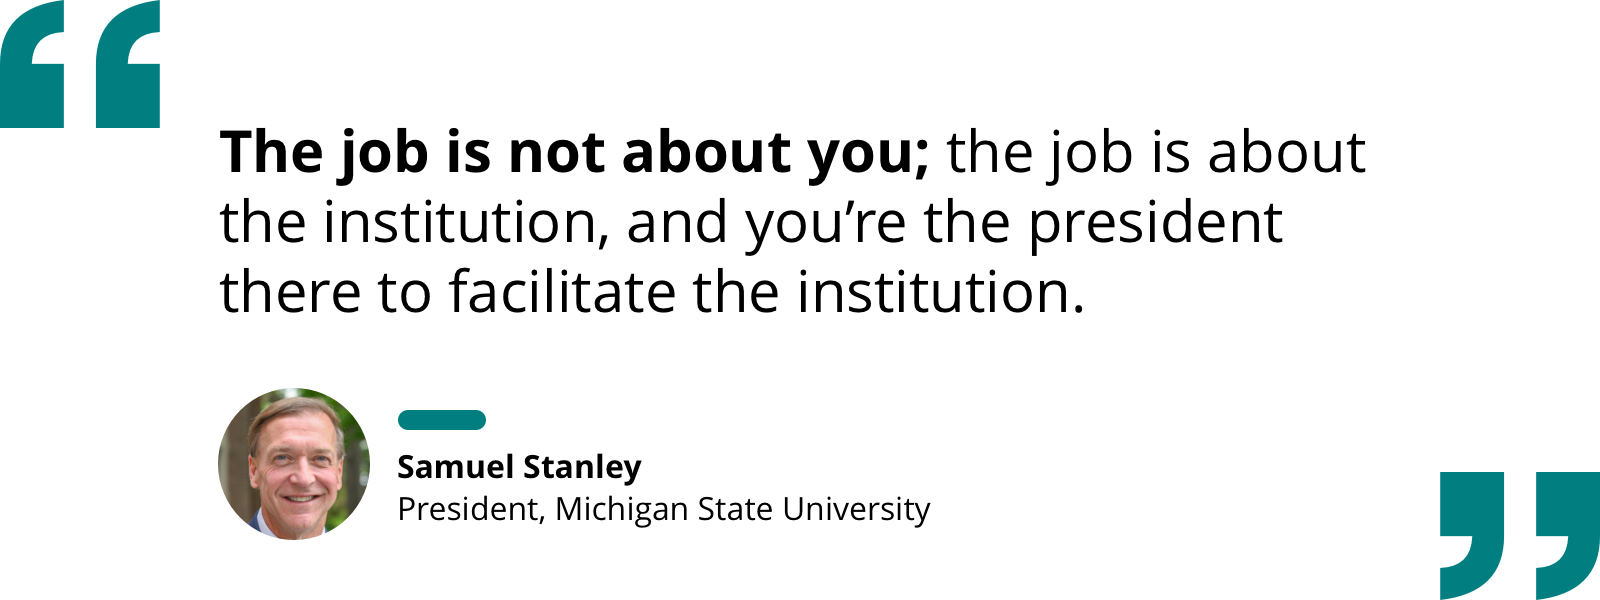 Quote by Samuel Stanley re: the job is about the institution, not you; you're there to facilitate the institution.